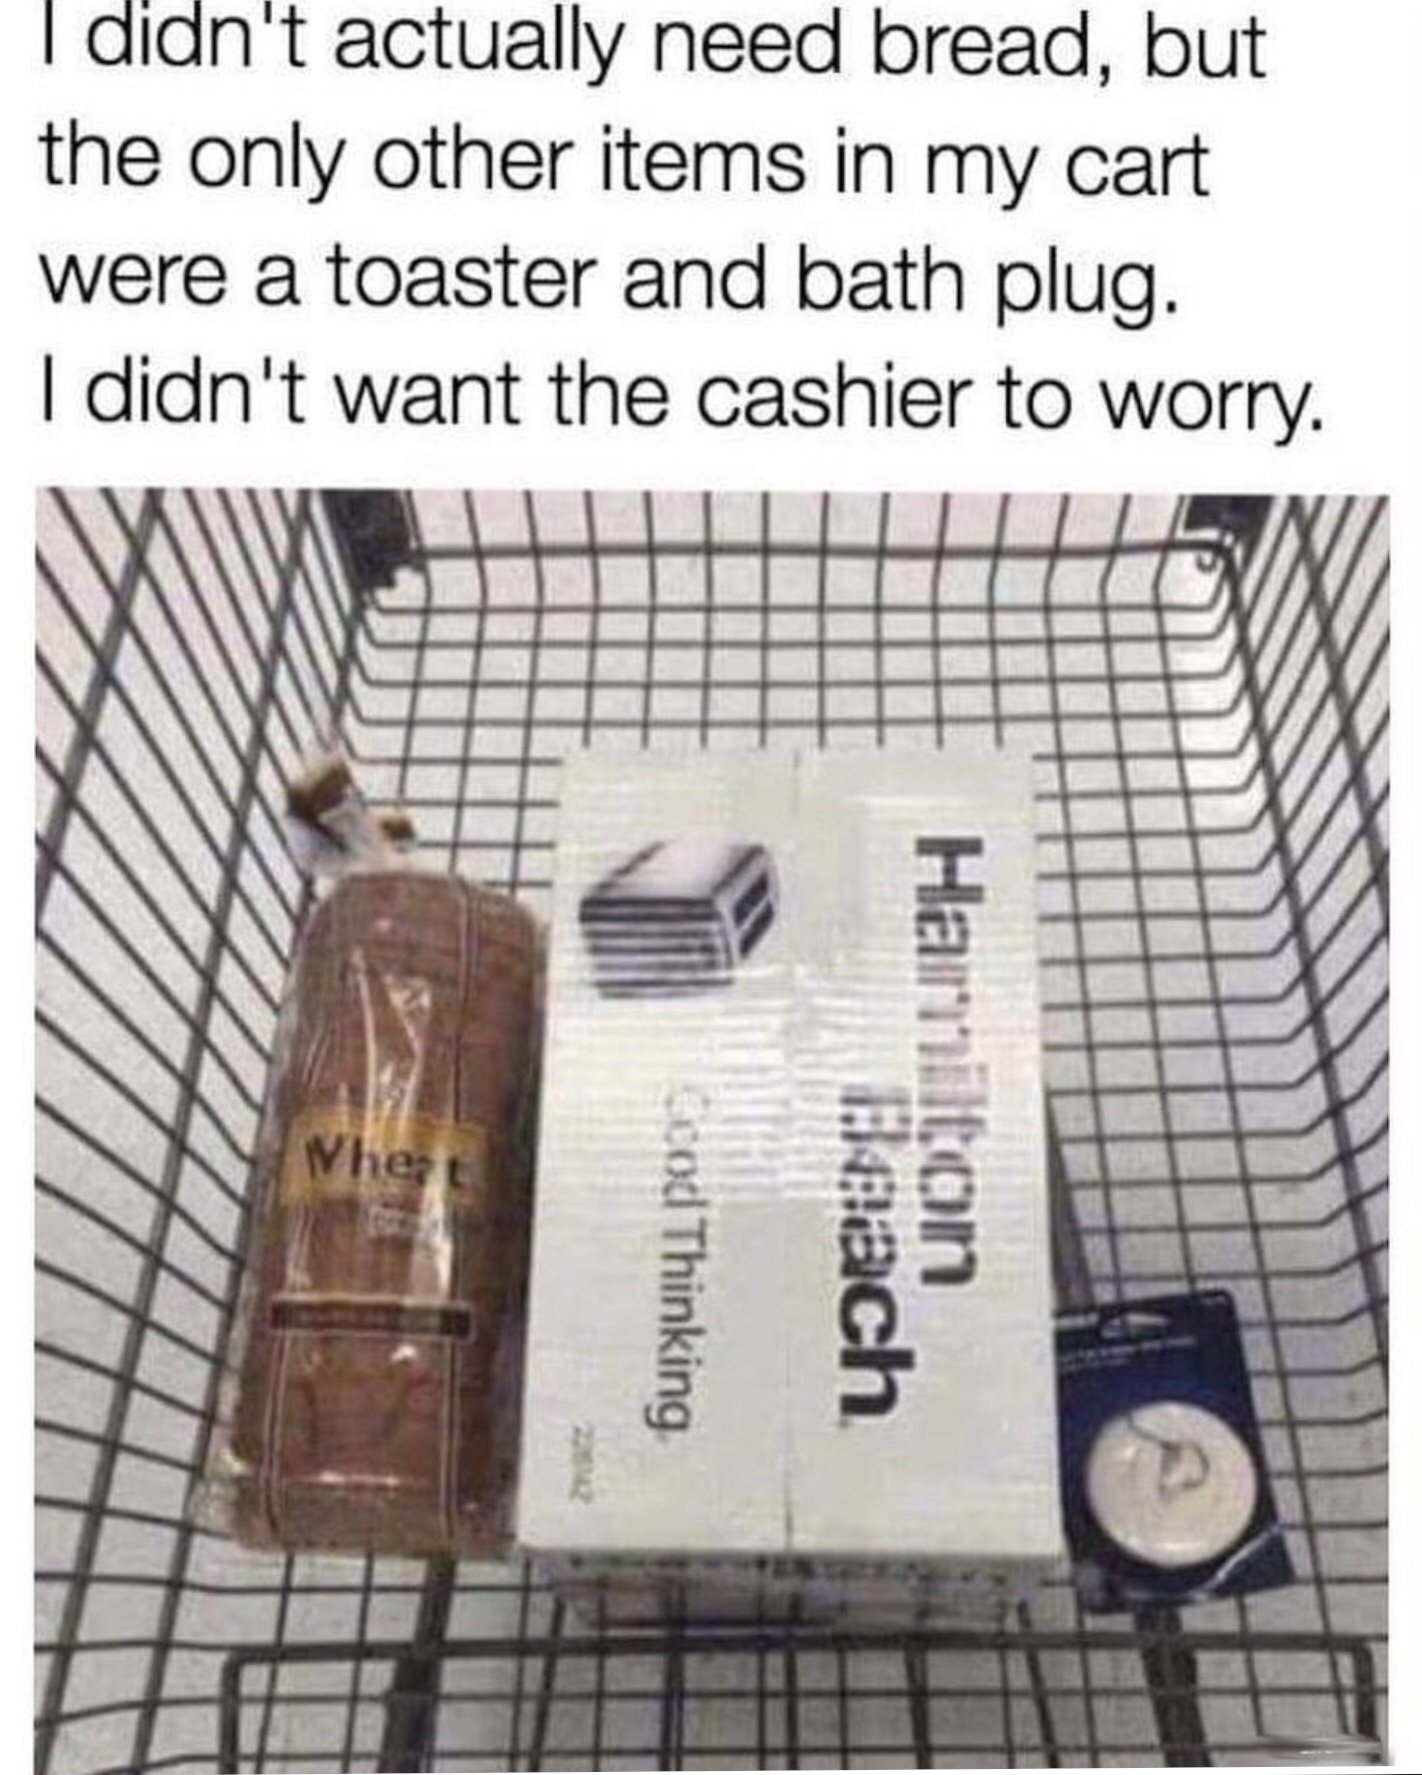 didn t want the cashier to worry - I didn't actually need bread, but the only other items in my cart were a toaster and bath plug. I didn't want the cashier to worry. Cood Thinking Hamilton Beach